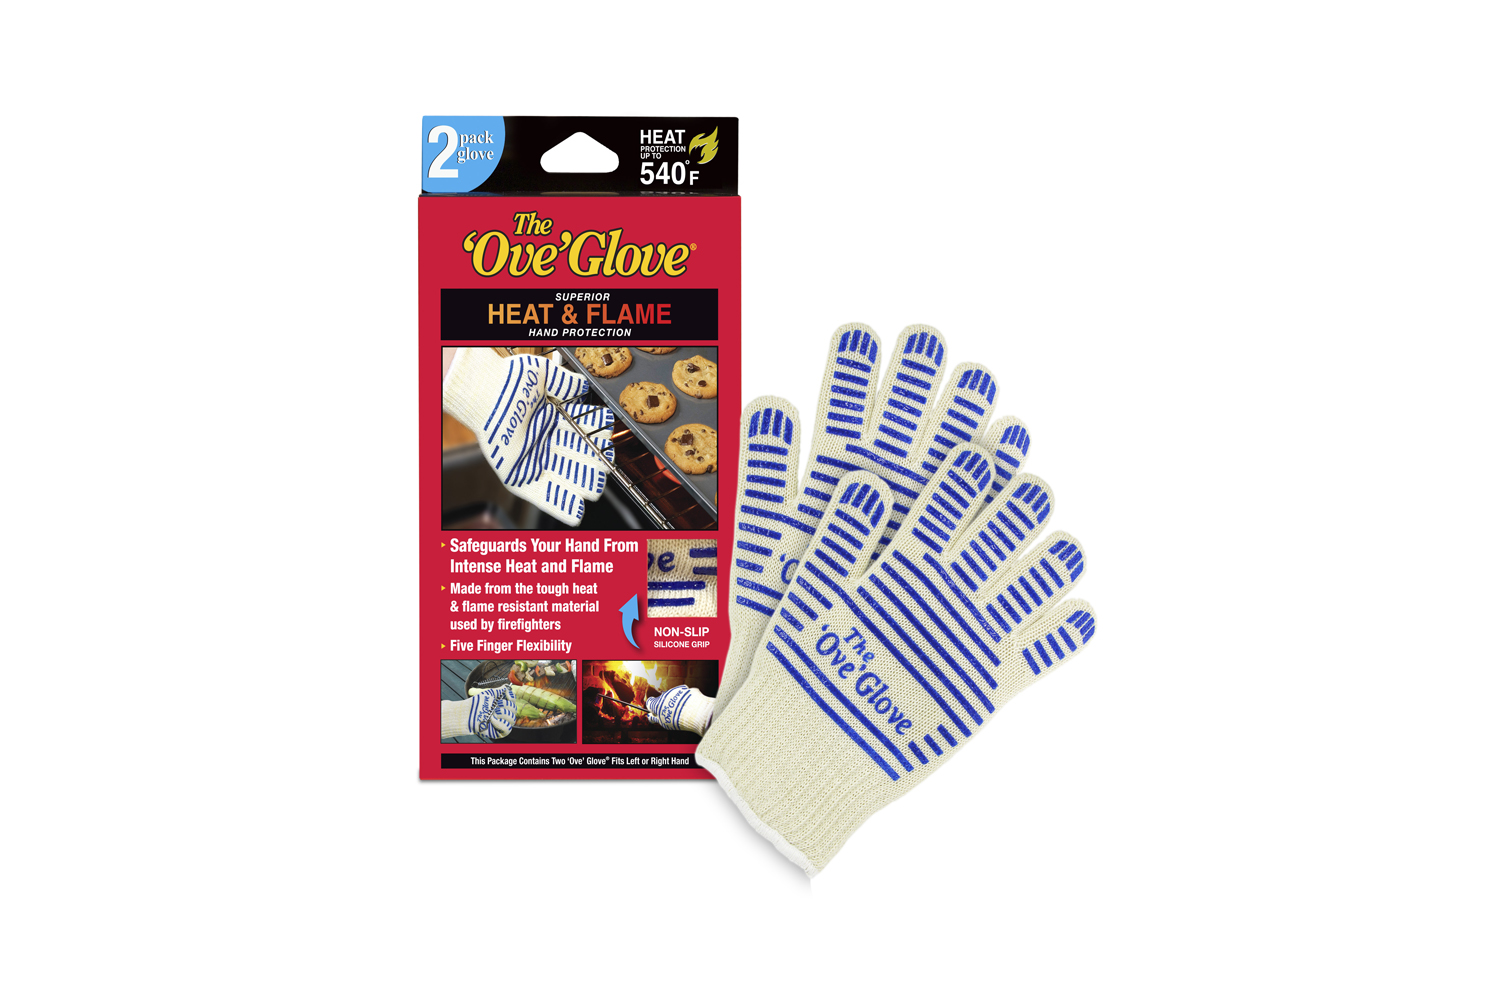 https://www.themanual.com/wp-content/uploads/sites/9/2021/06/the-ove-glove.jpeg?fit=800%2C800&p=1